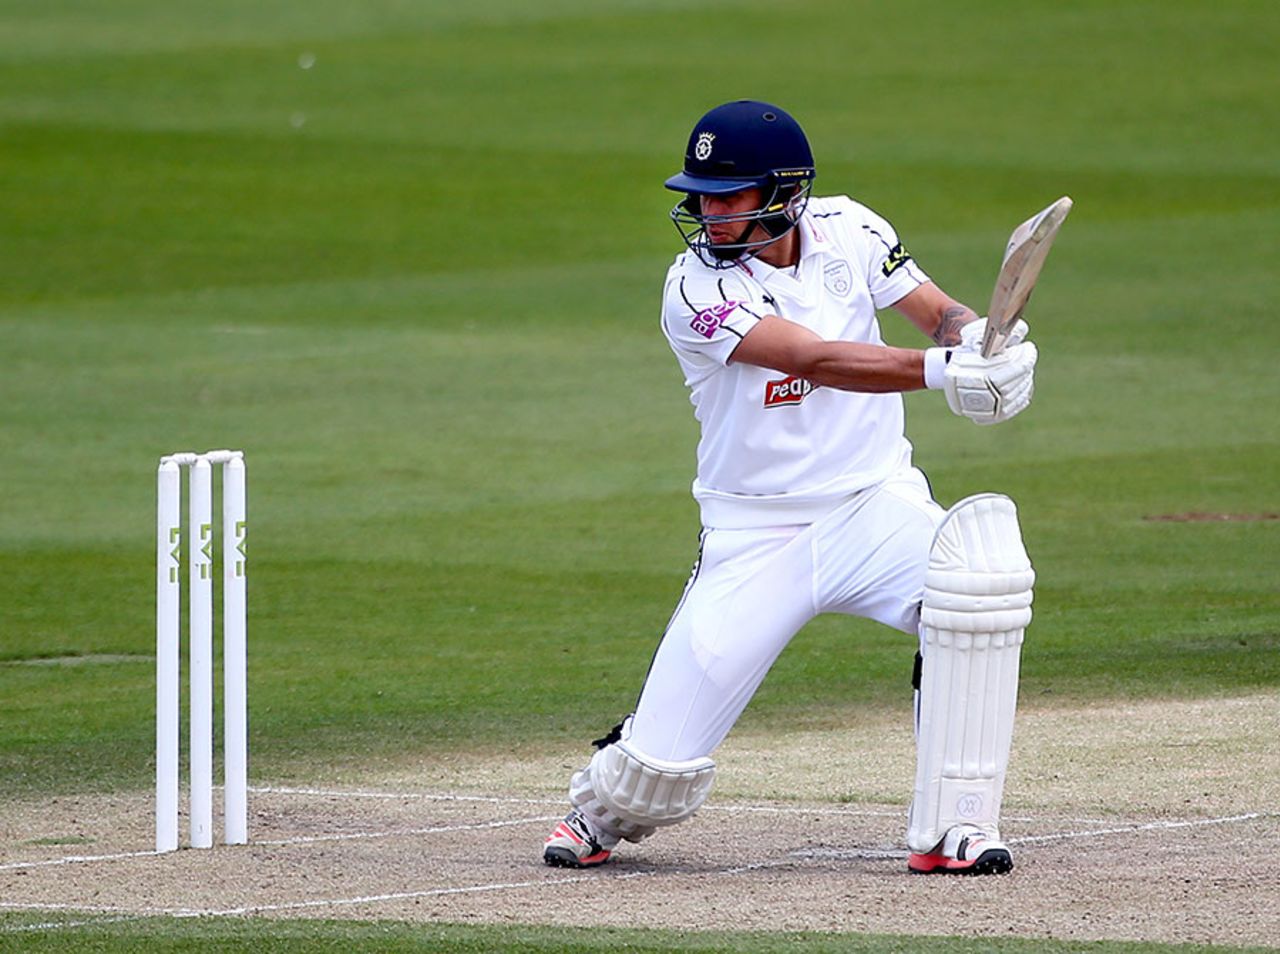 Gareth Berg carves square on his way to 99, Sussex v Hampshire, County Championship Division One, Hove, 2nd day, June 8, 2015